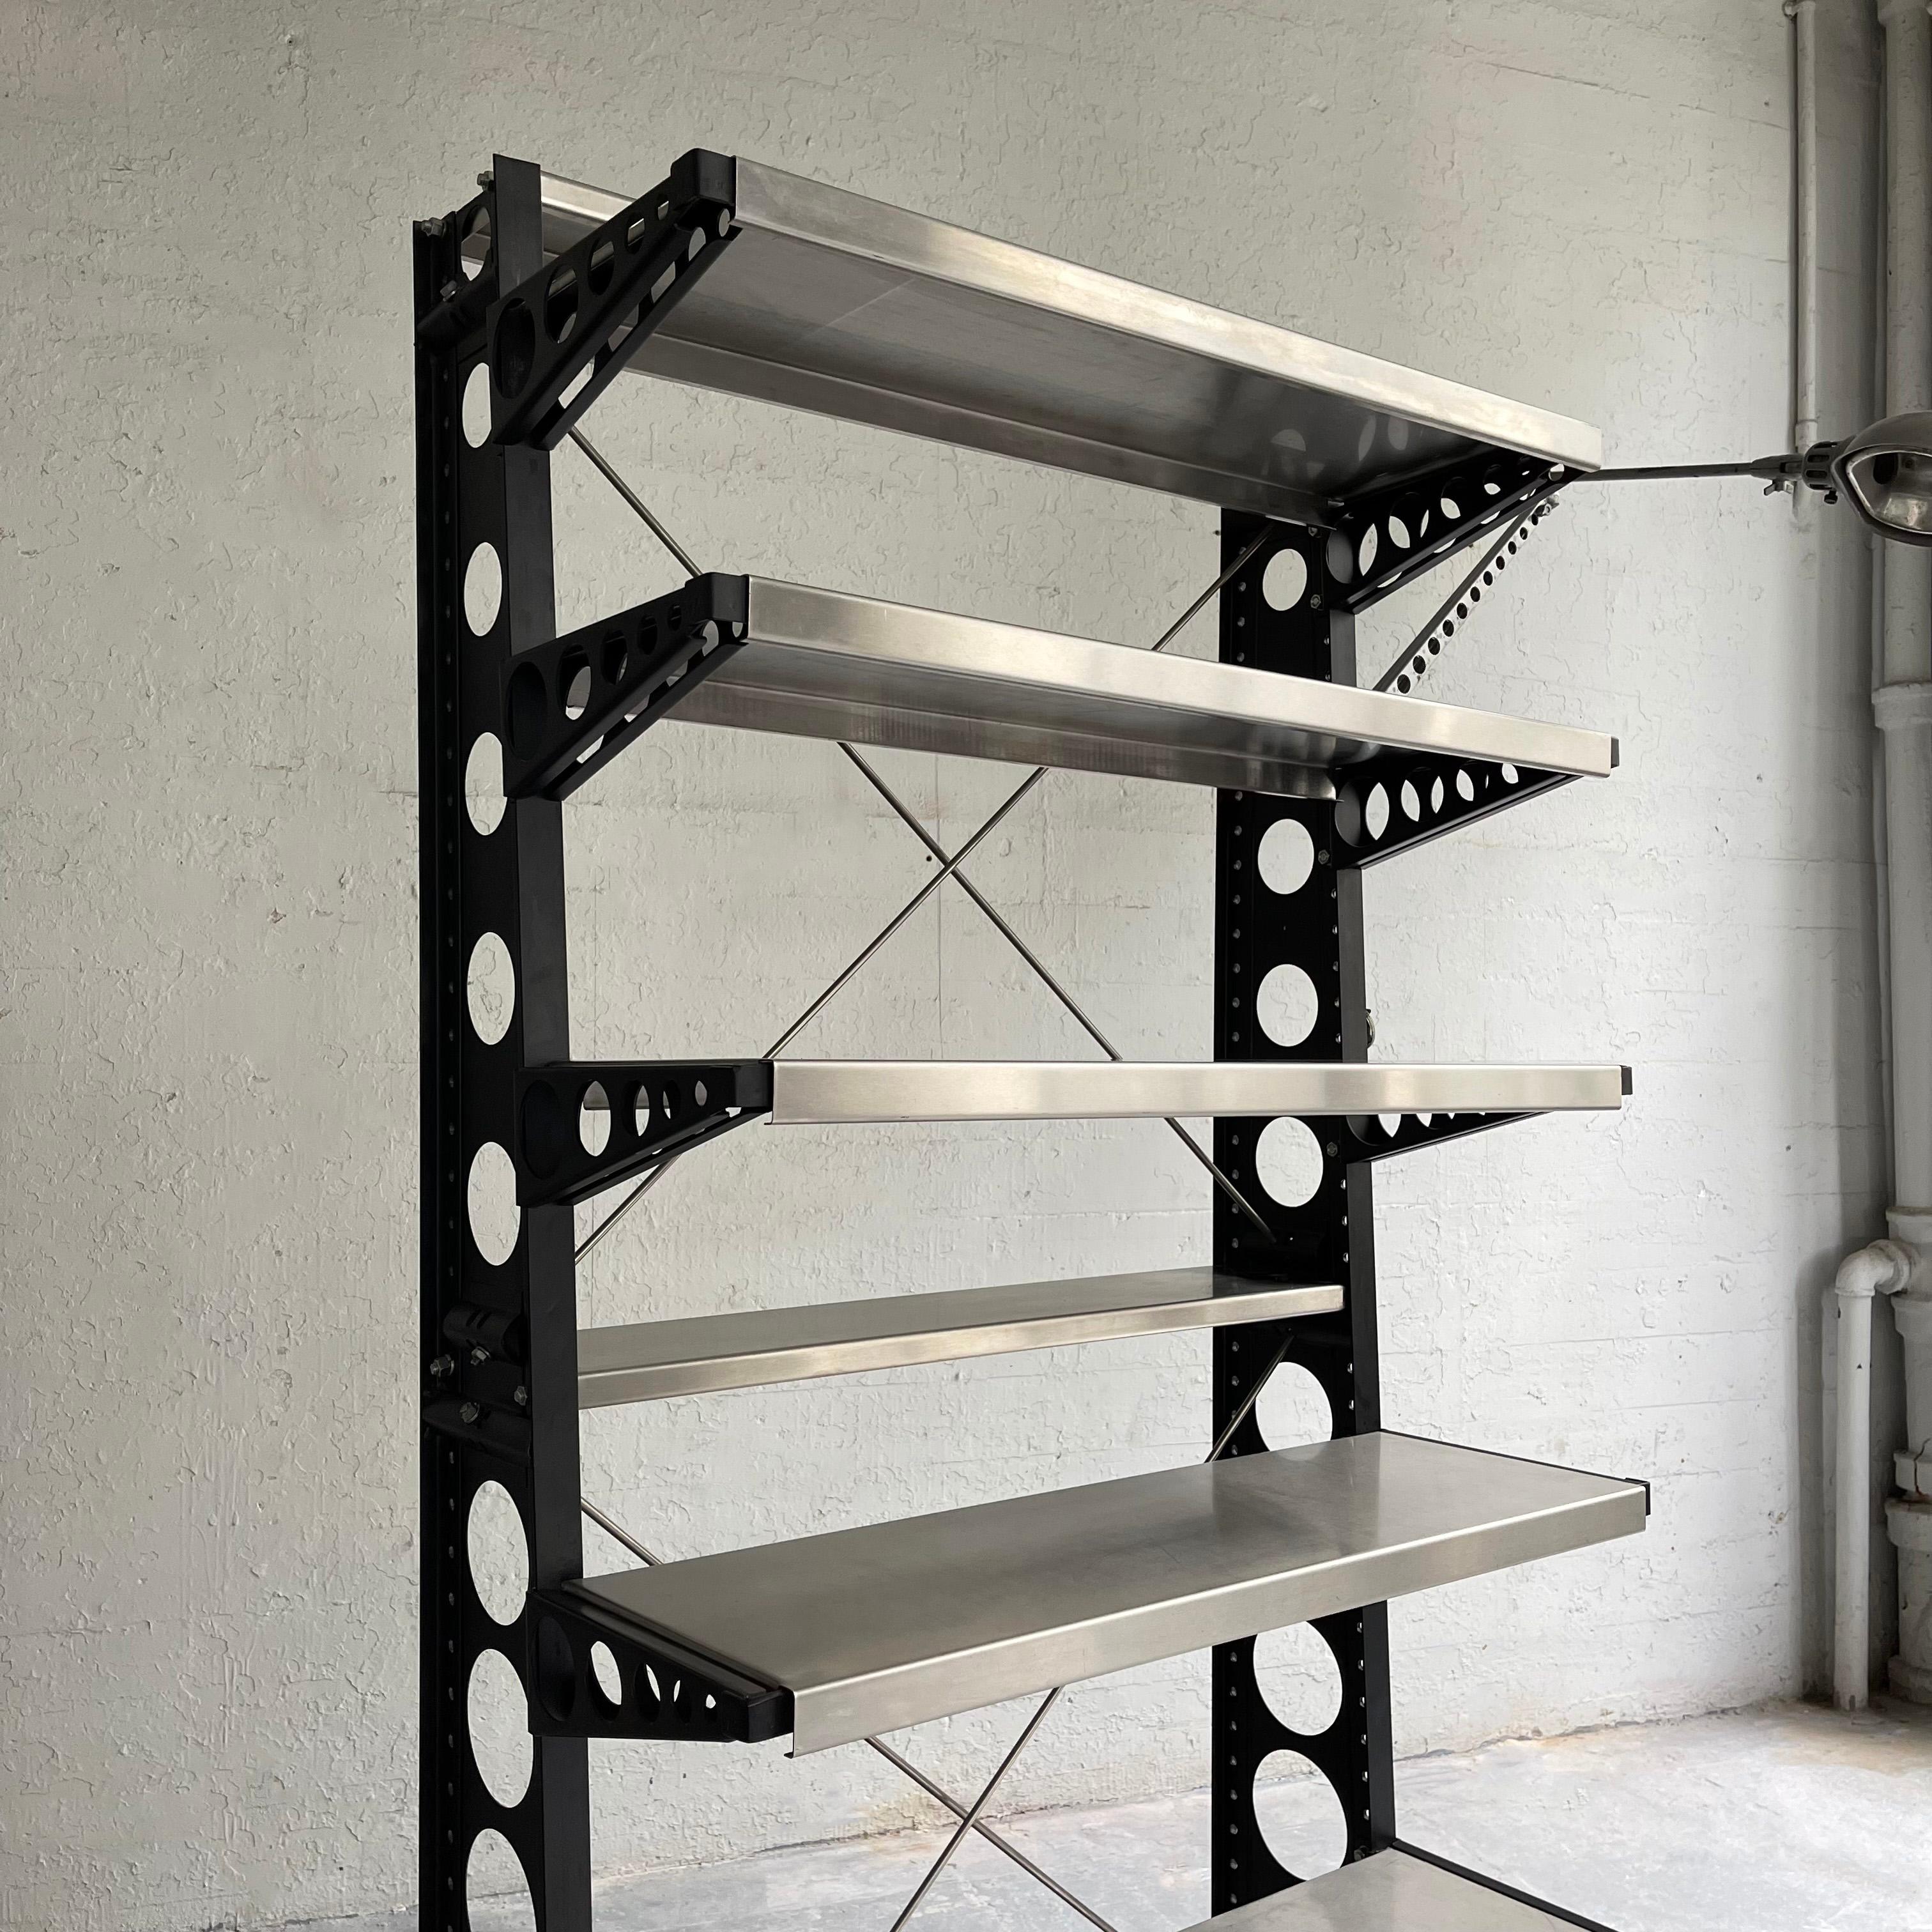 American Open Industrial Steel Shelving Unit with Task Lamp For Sale